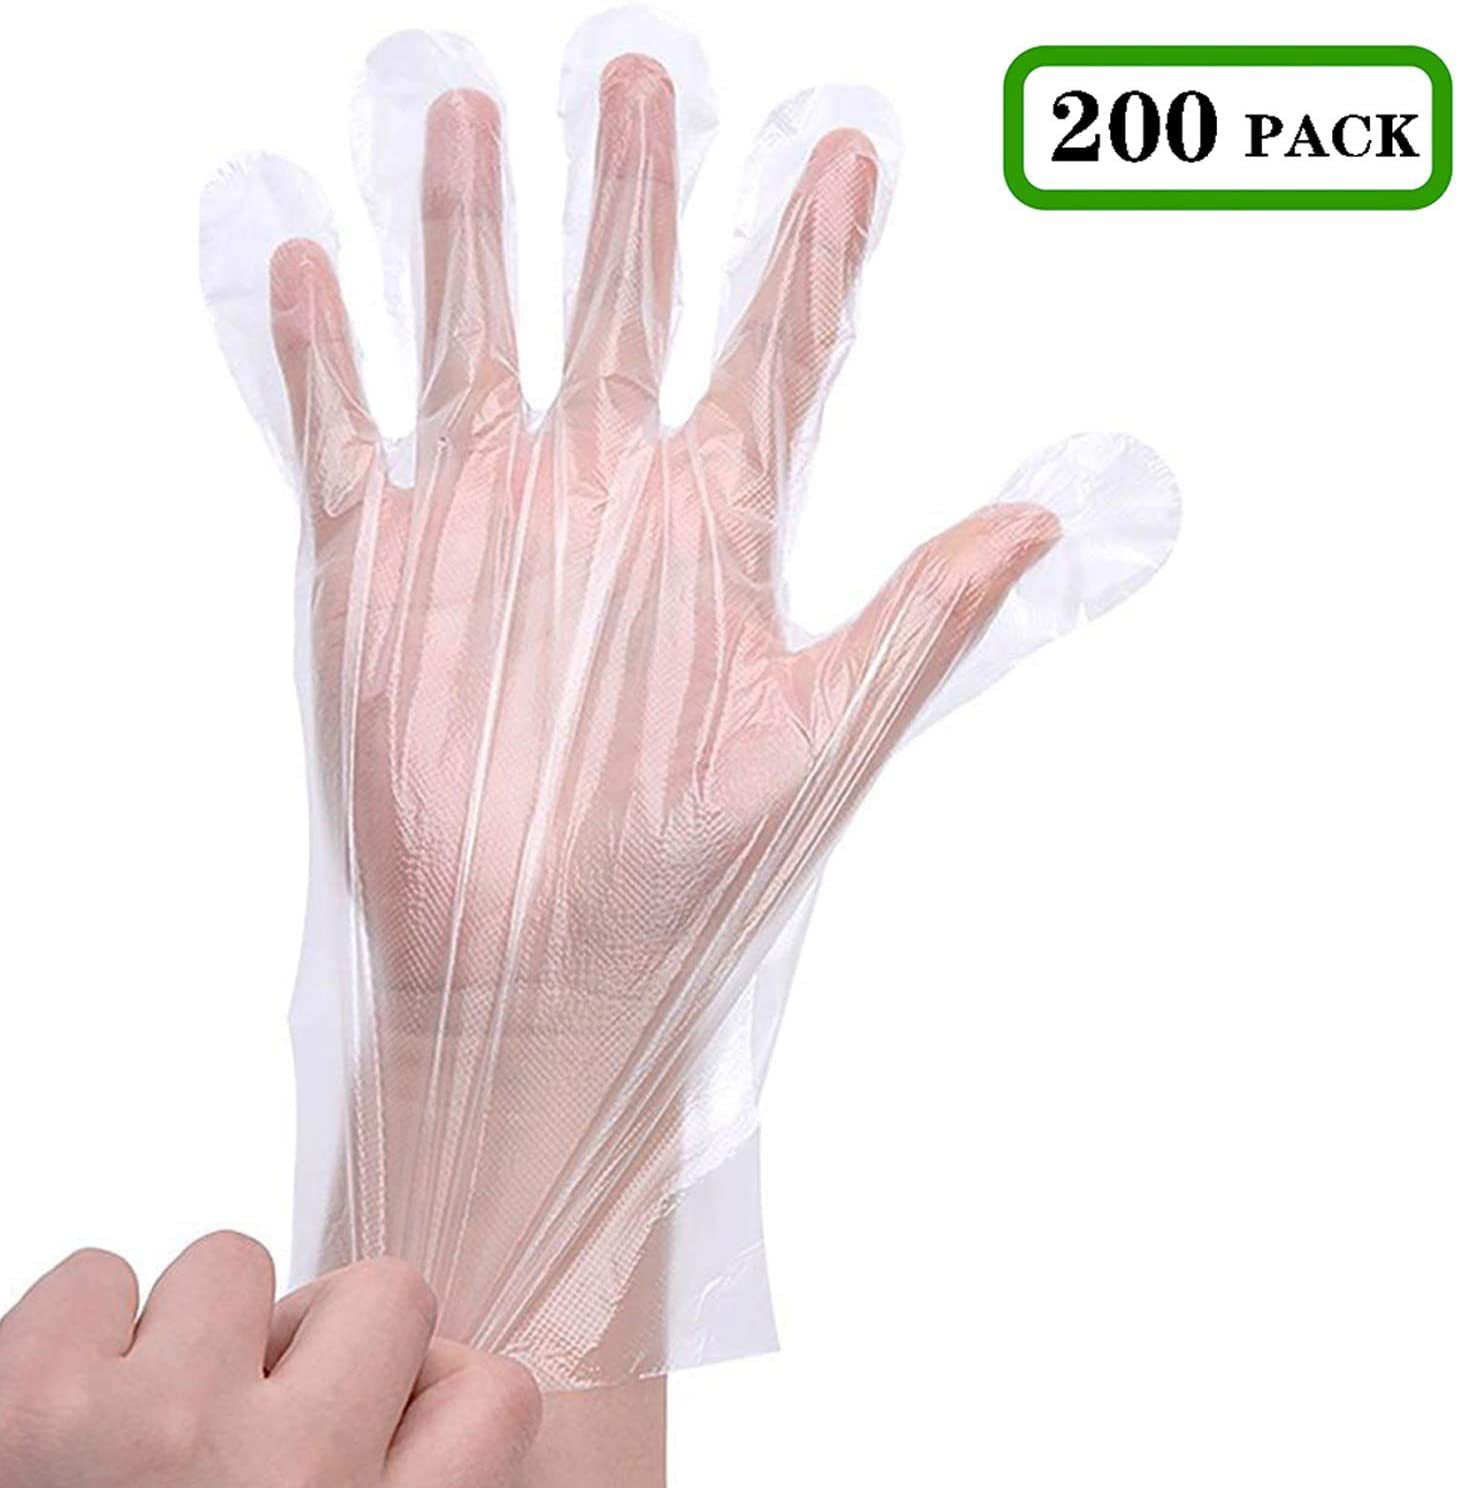 100 Pcs Plastic Disposable Gloves for Kitchen Cooking Cleaning Spa Hair Salon 